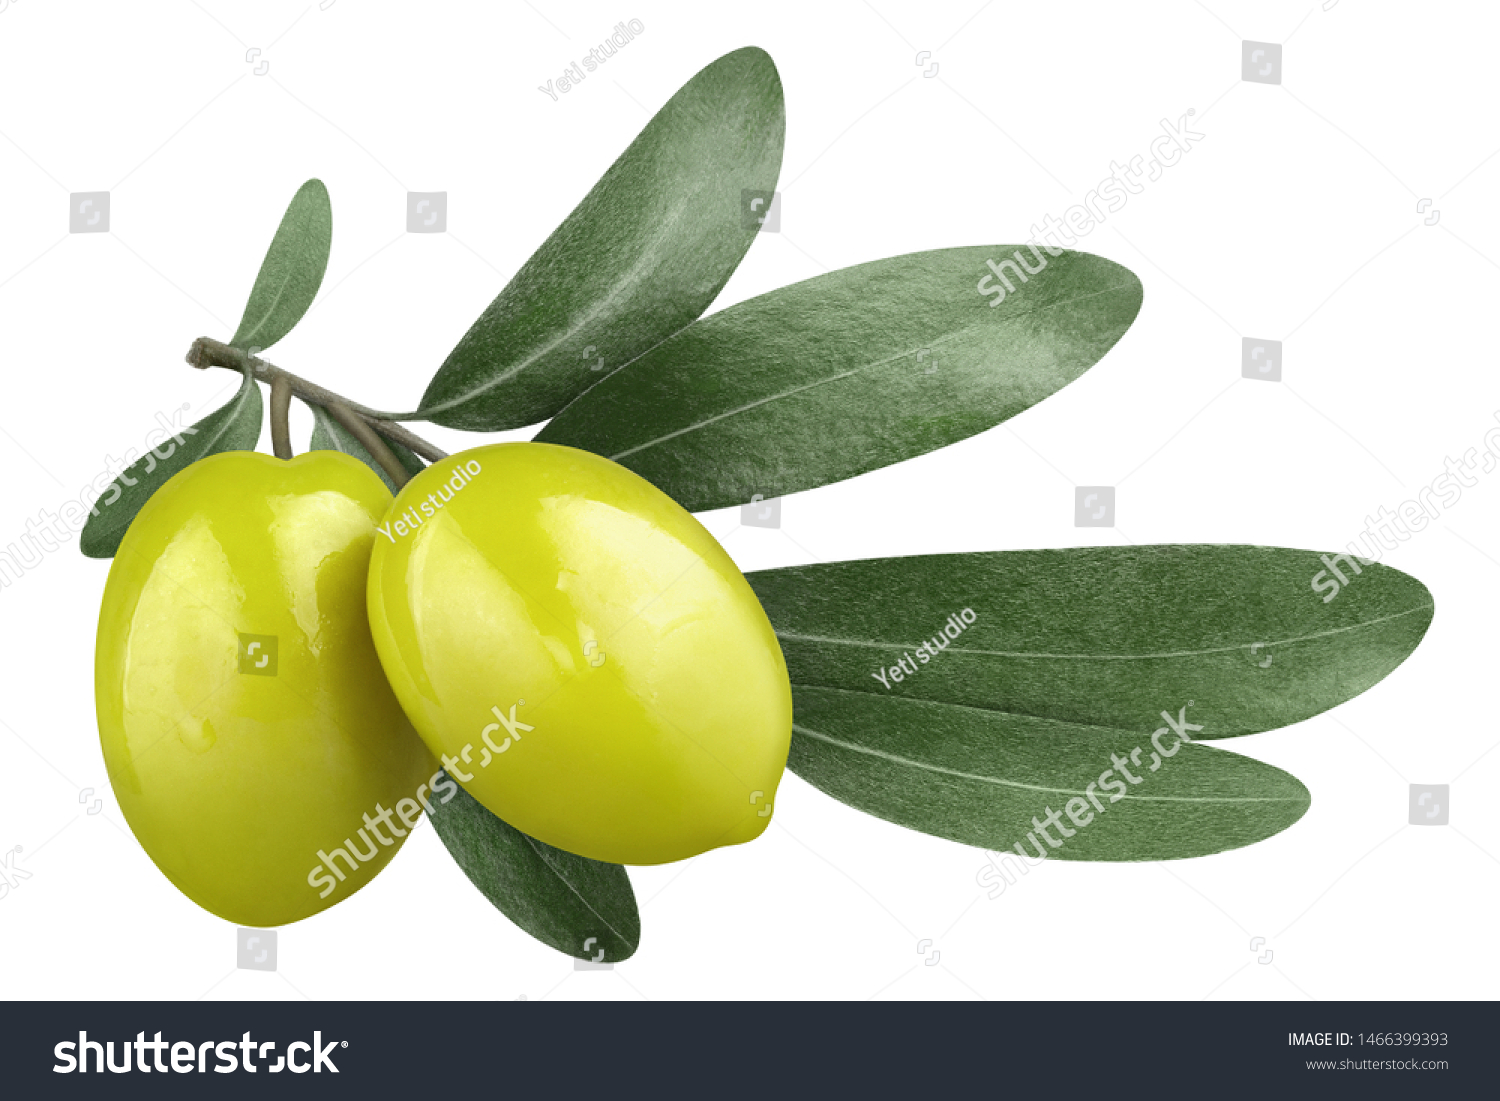 Olive branch with two delicious green olives, isolated on white background #1466399393